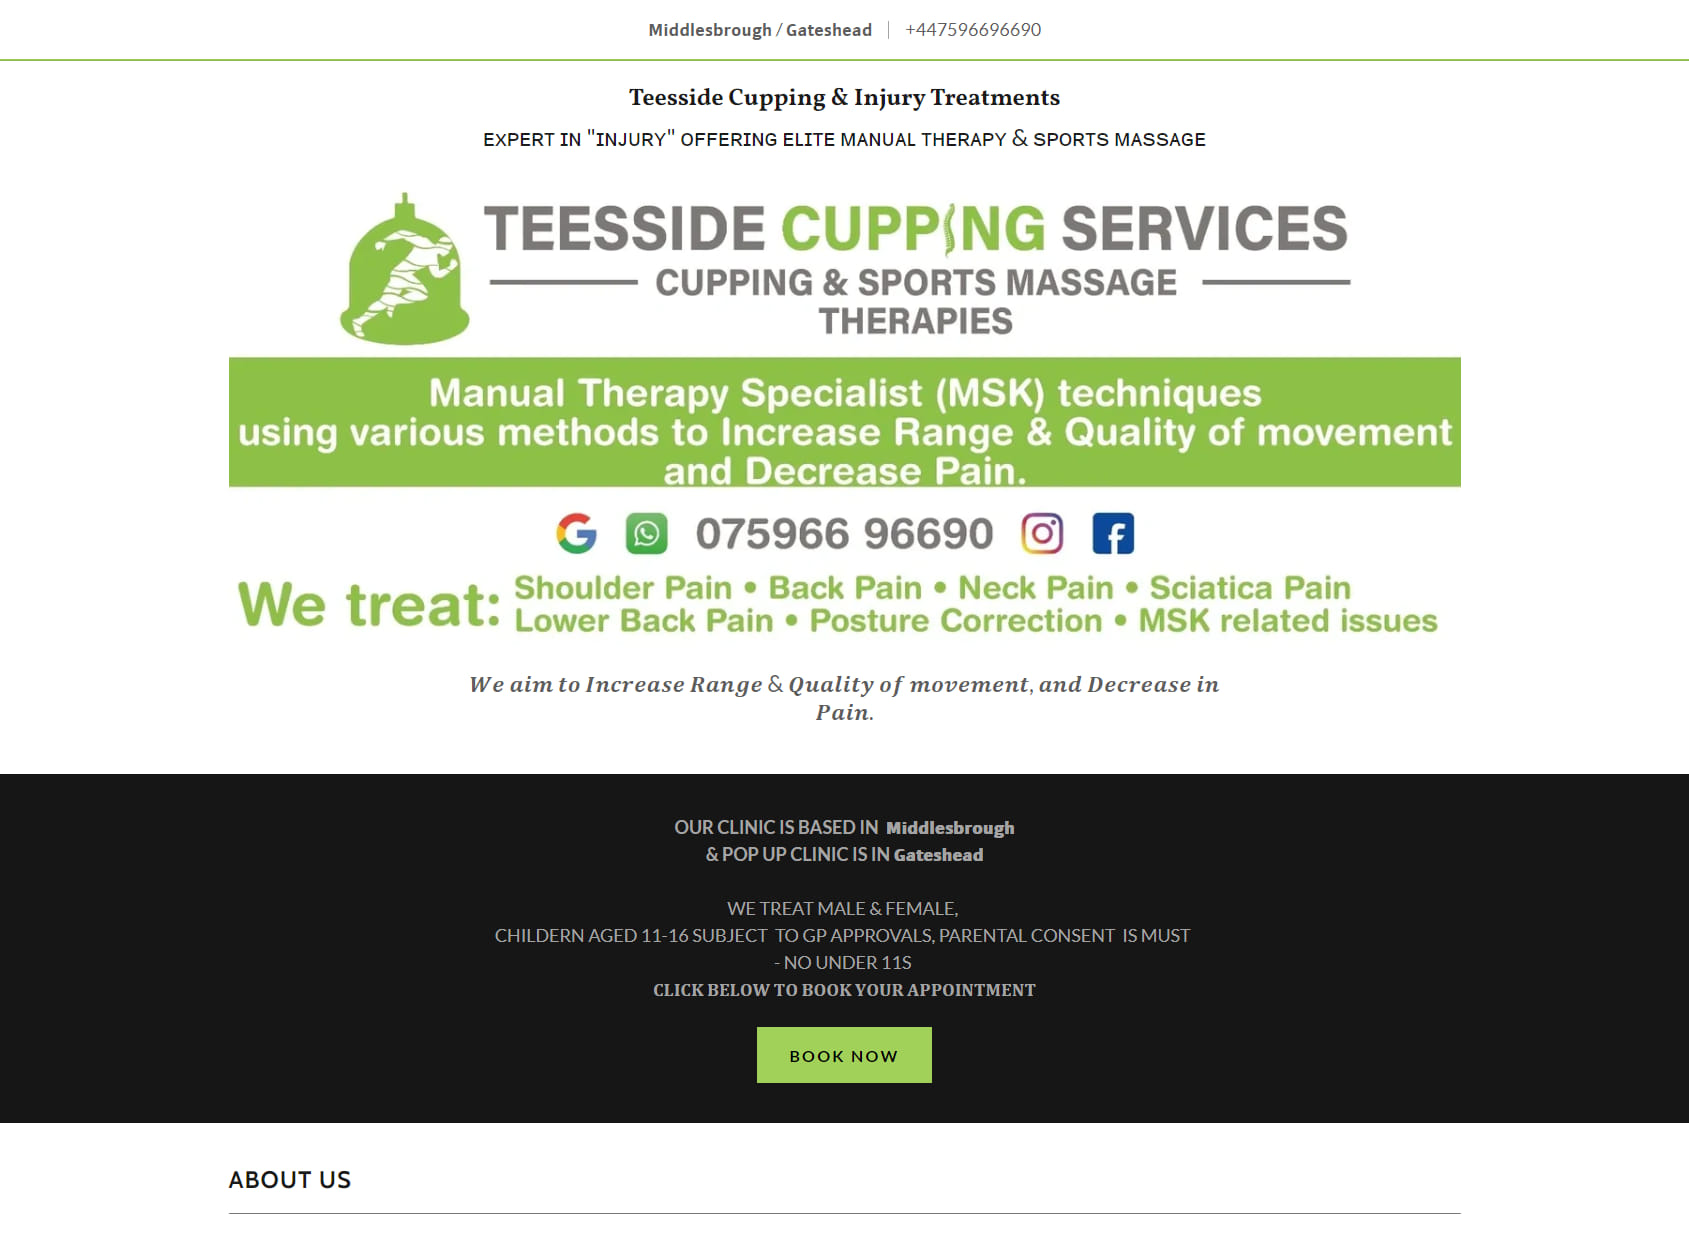 Teesside Cupping & Injury Treatments